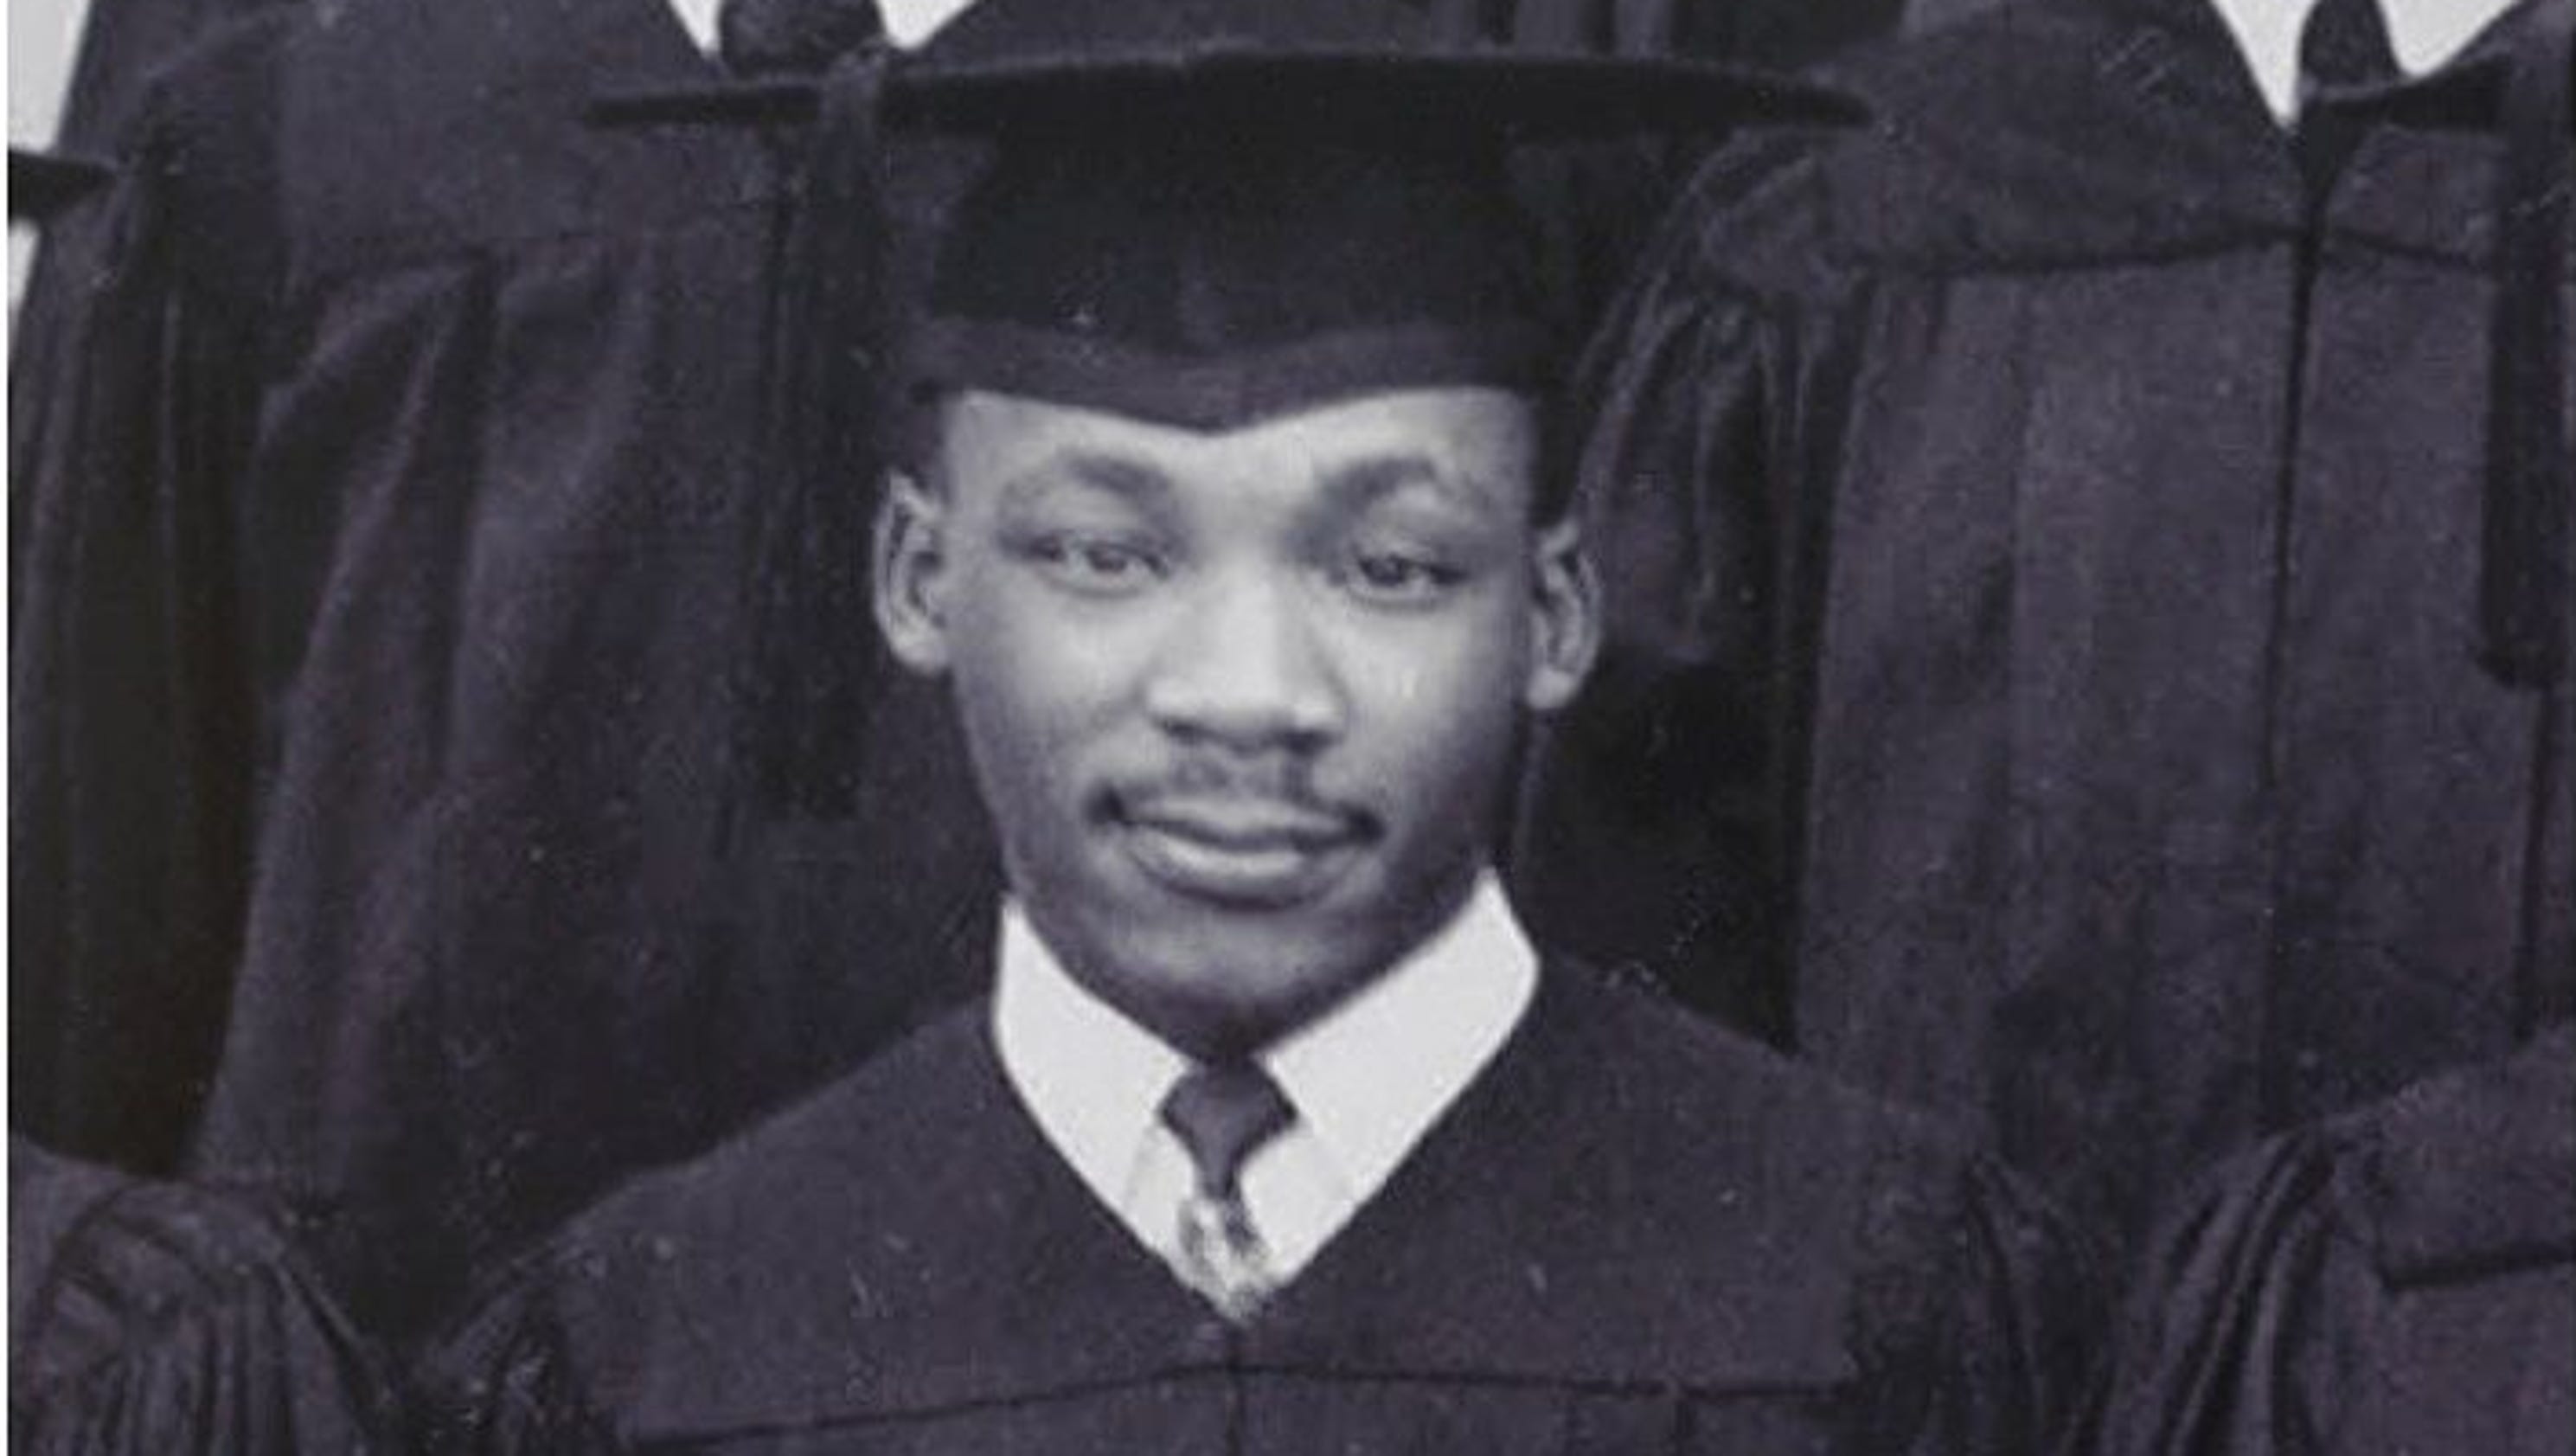 Morehouse College, King's alma mater, lives out his legacy